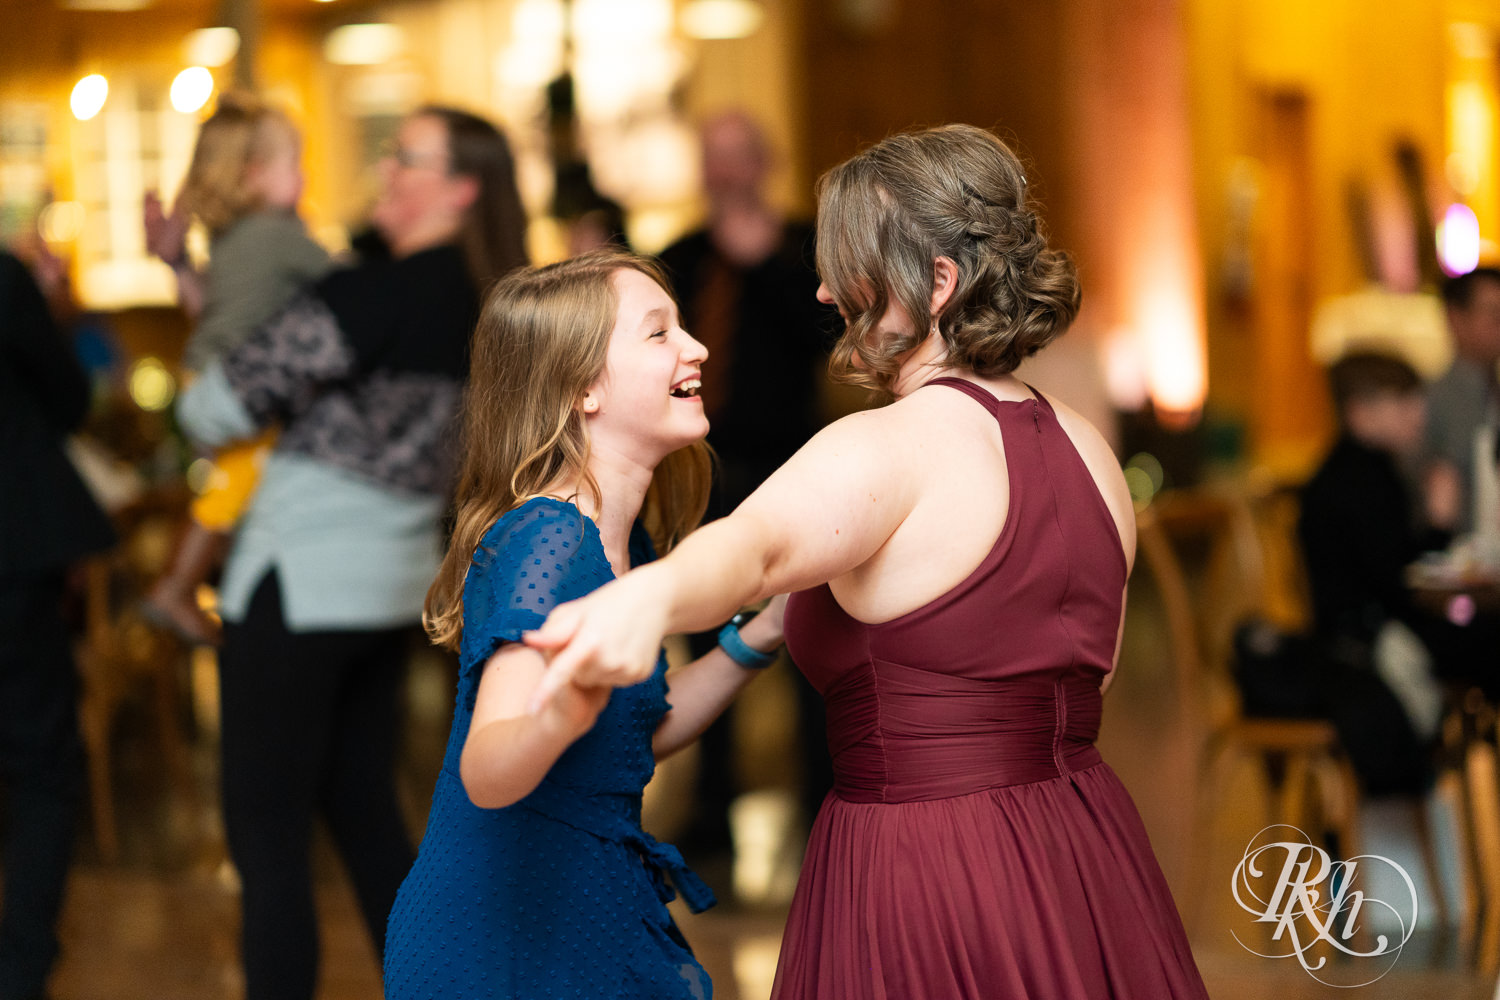 Guests dance at wedding reception at Almquist Farm in Hastings, Minnesota.